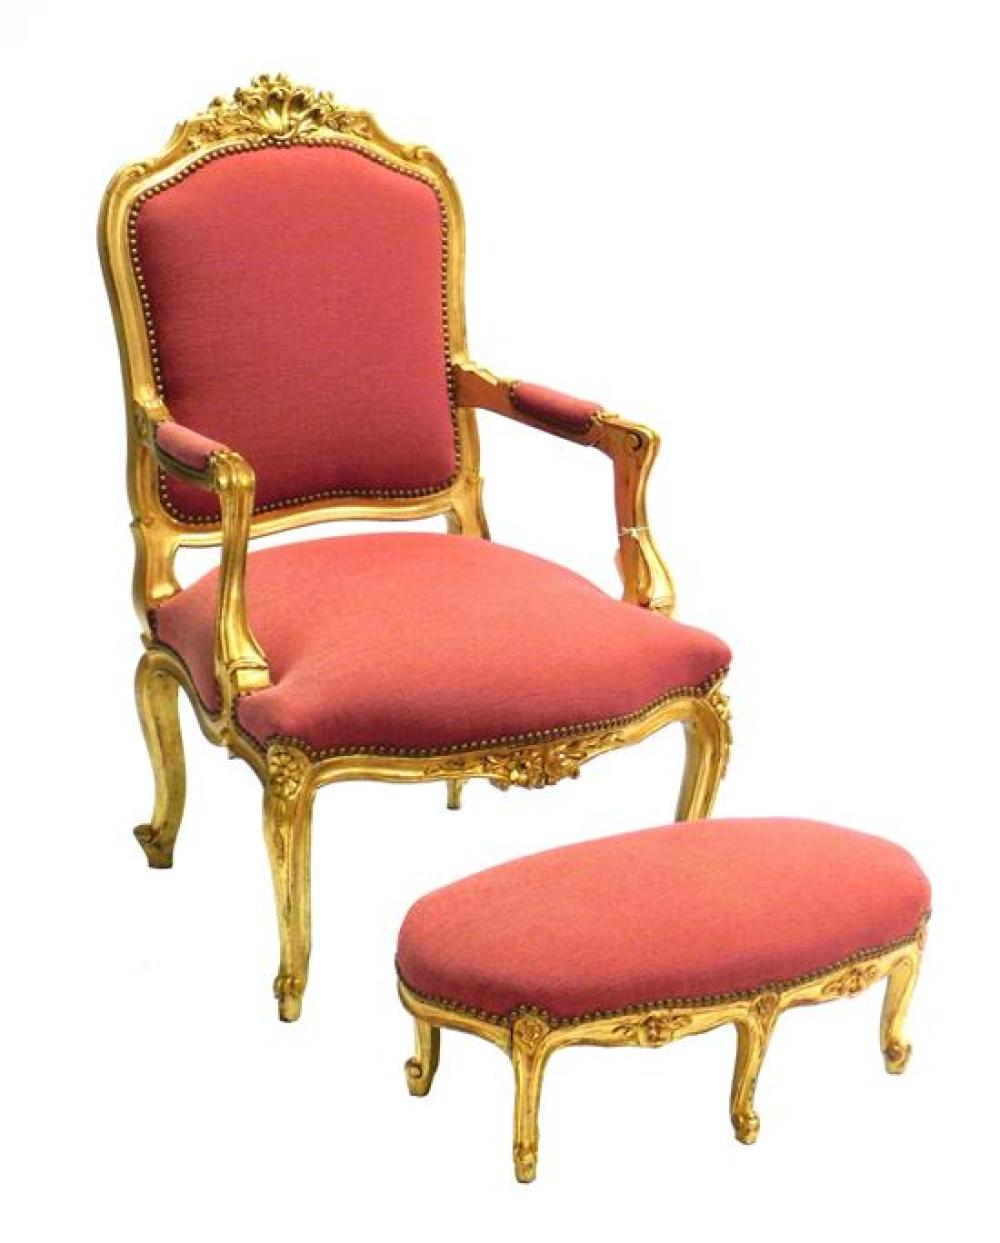 LOUIS XV STYLE UPHOLSTERED ARMCHAIR 31cd18